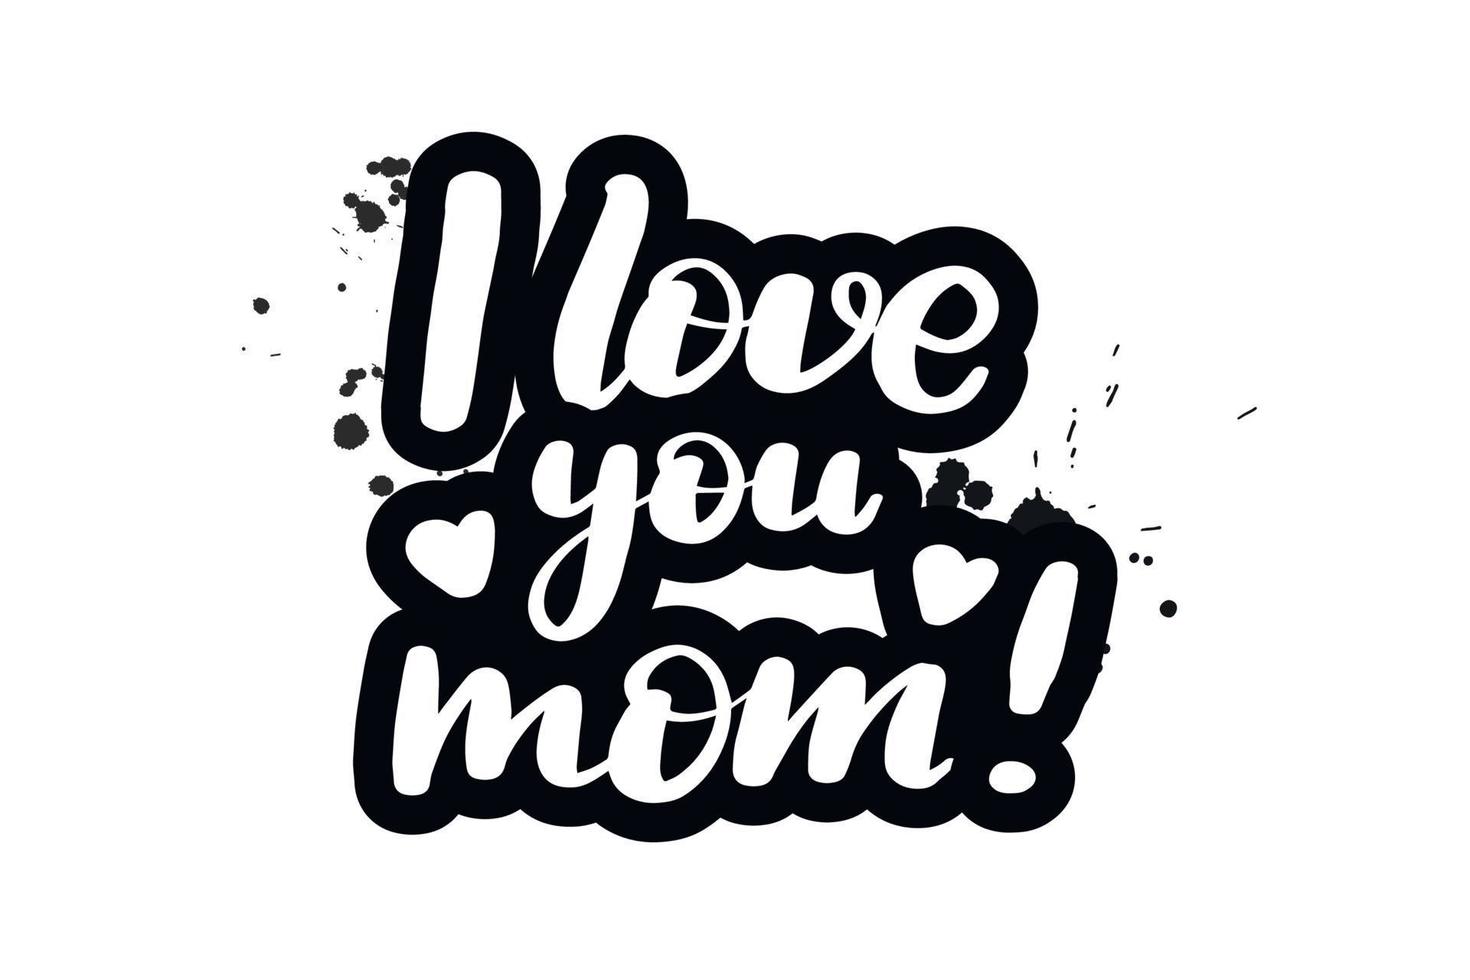 Inspirational handwritten brush lettering I love you mom. Vector calligraphy illustration isolated on white background. Typography for banners, badges, postcard, t shirt, prints, posters.